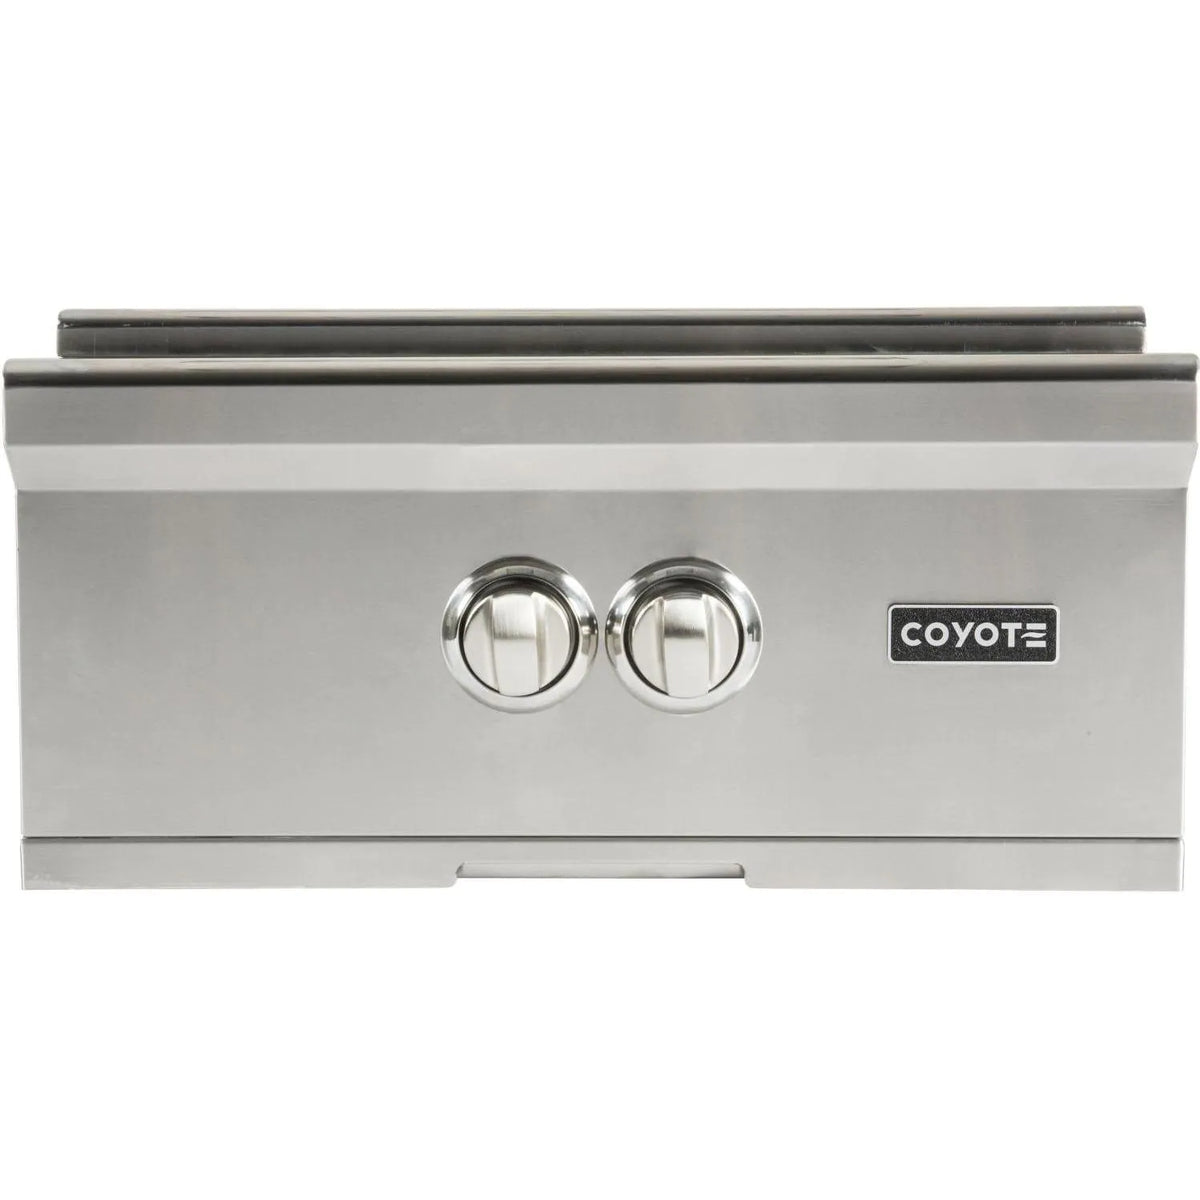 Coyote Built-In Propane Gas Power Burner Shown With Stainless Steel Lid